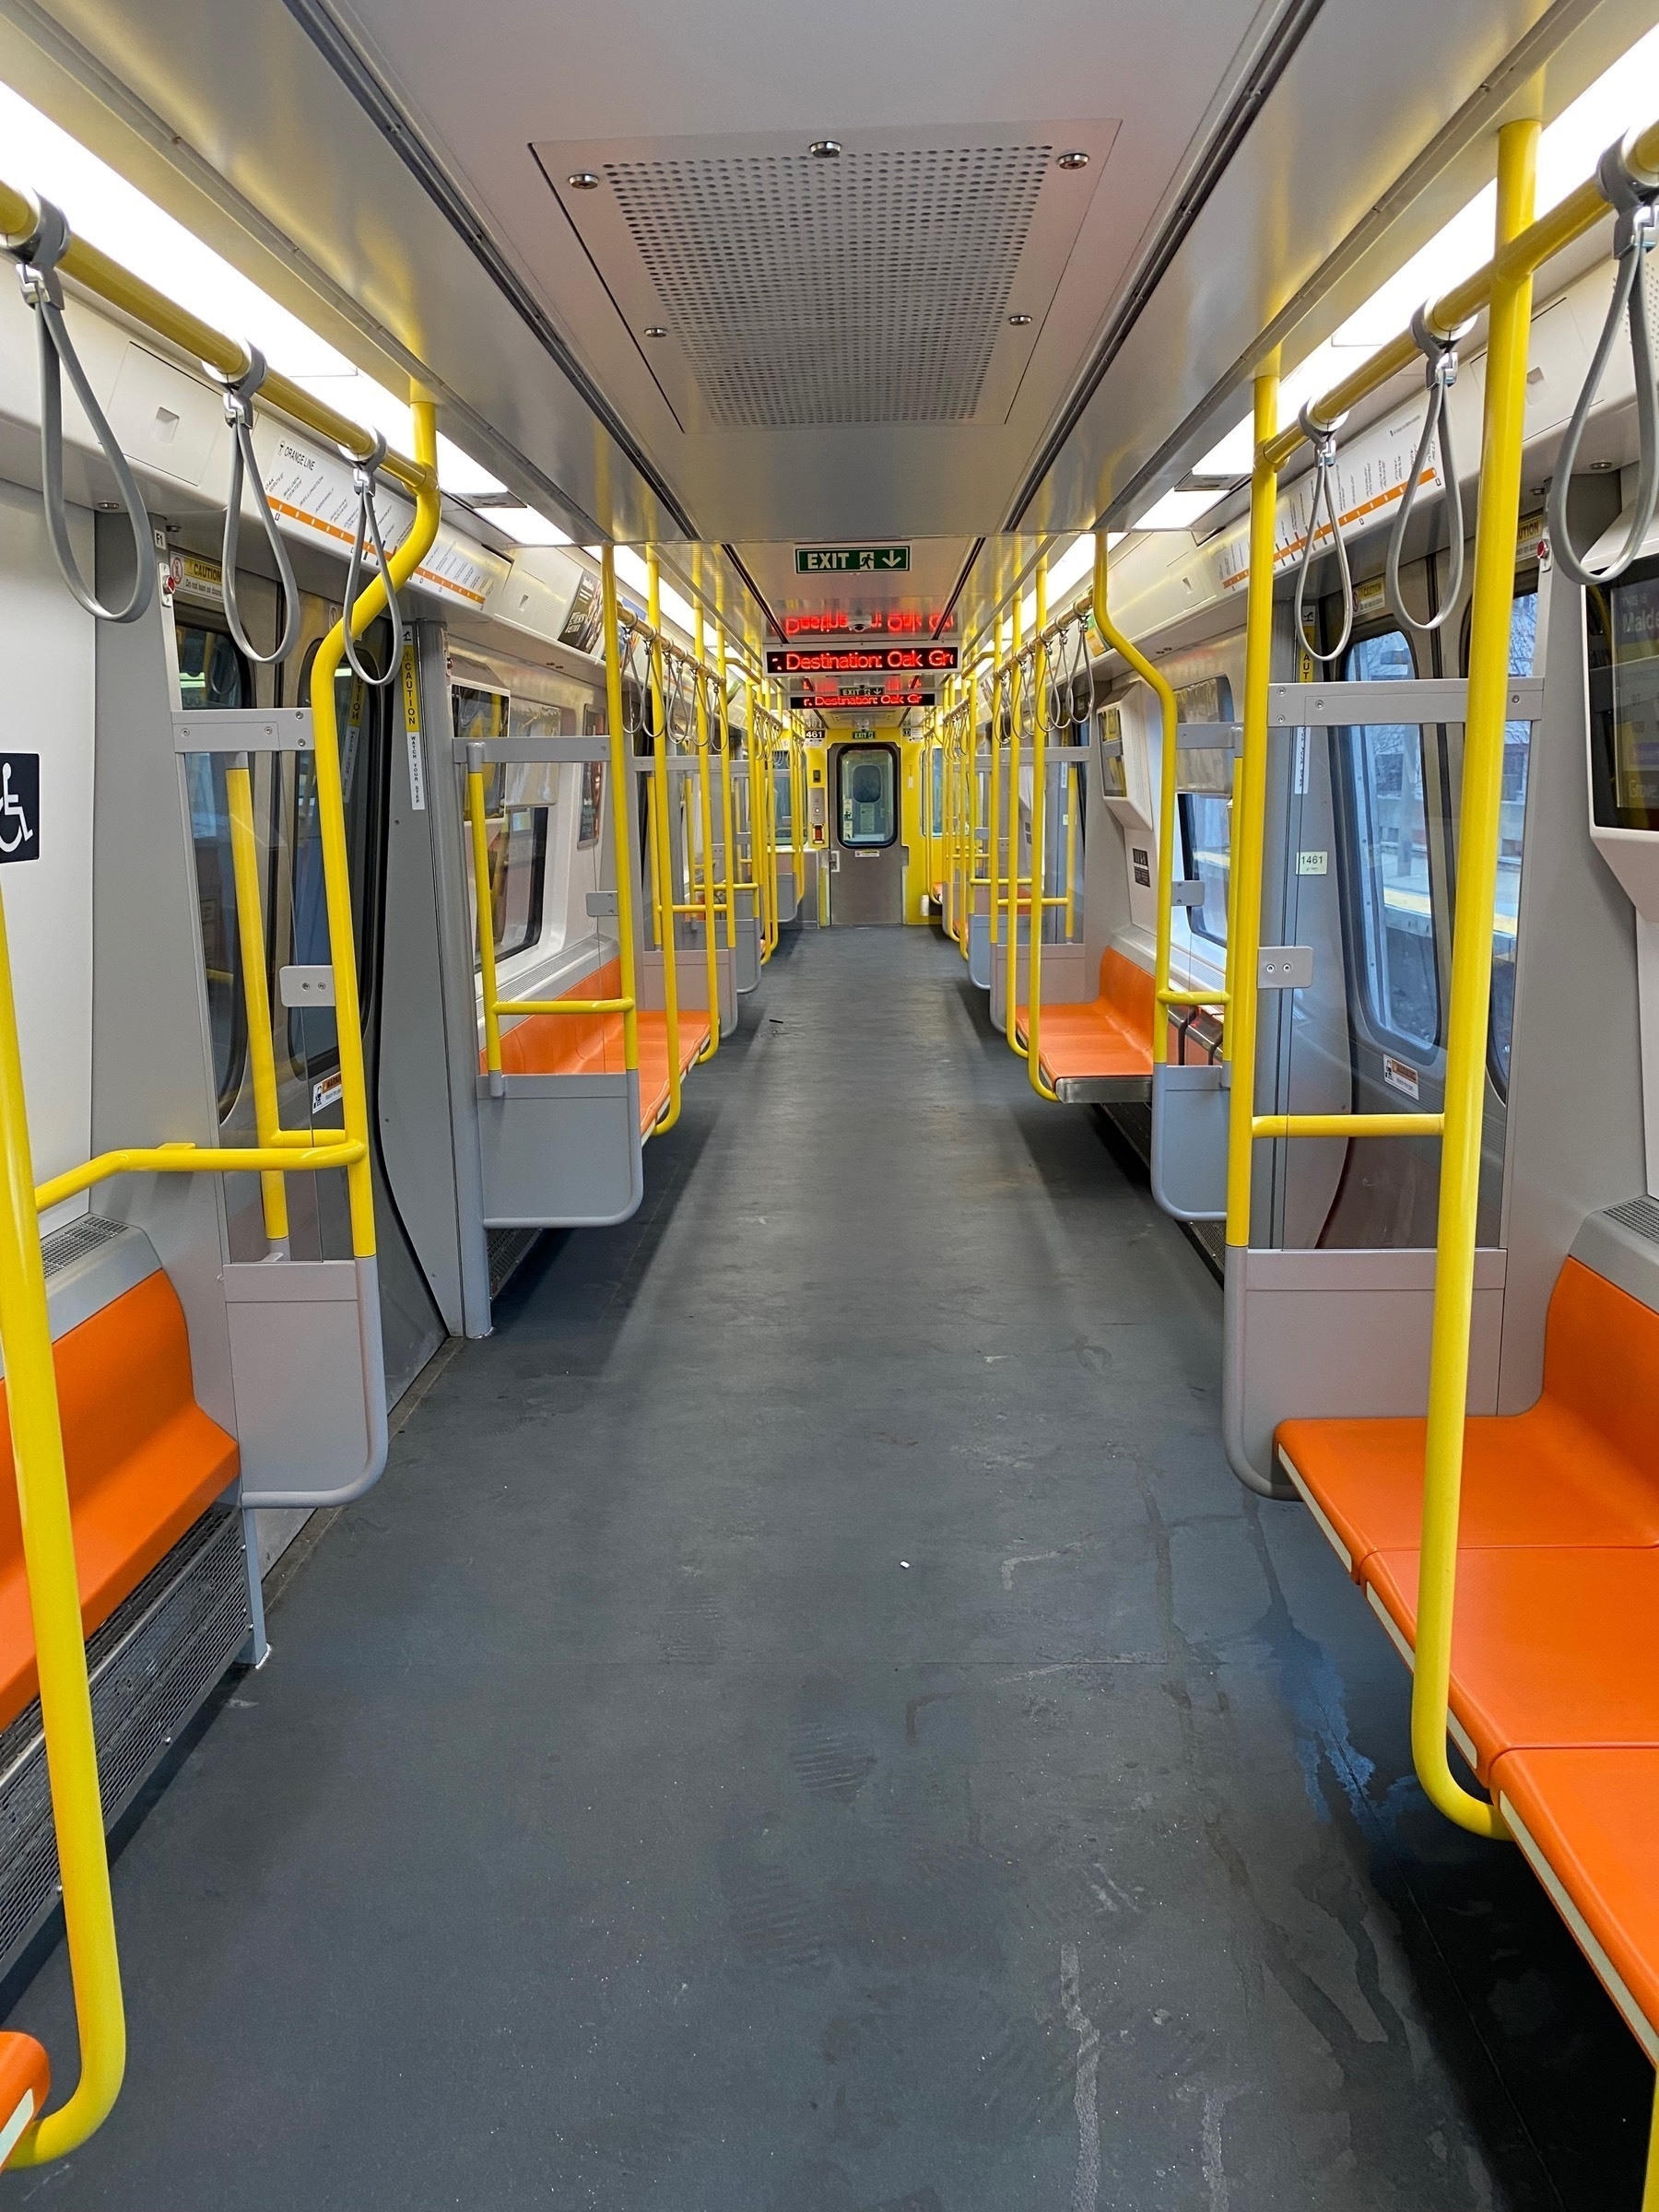 View of an empty Orange Line subway car from one end.